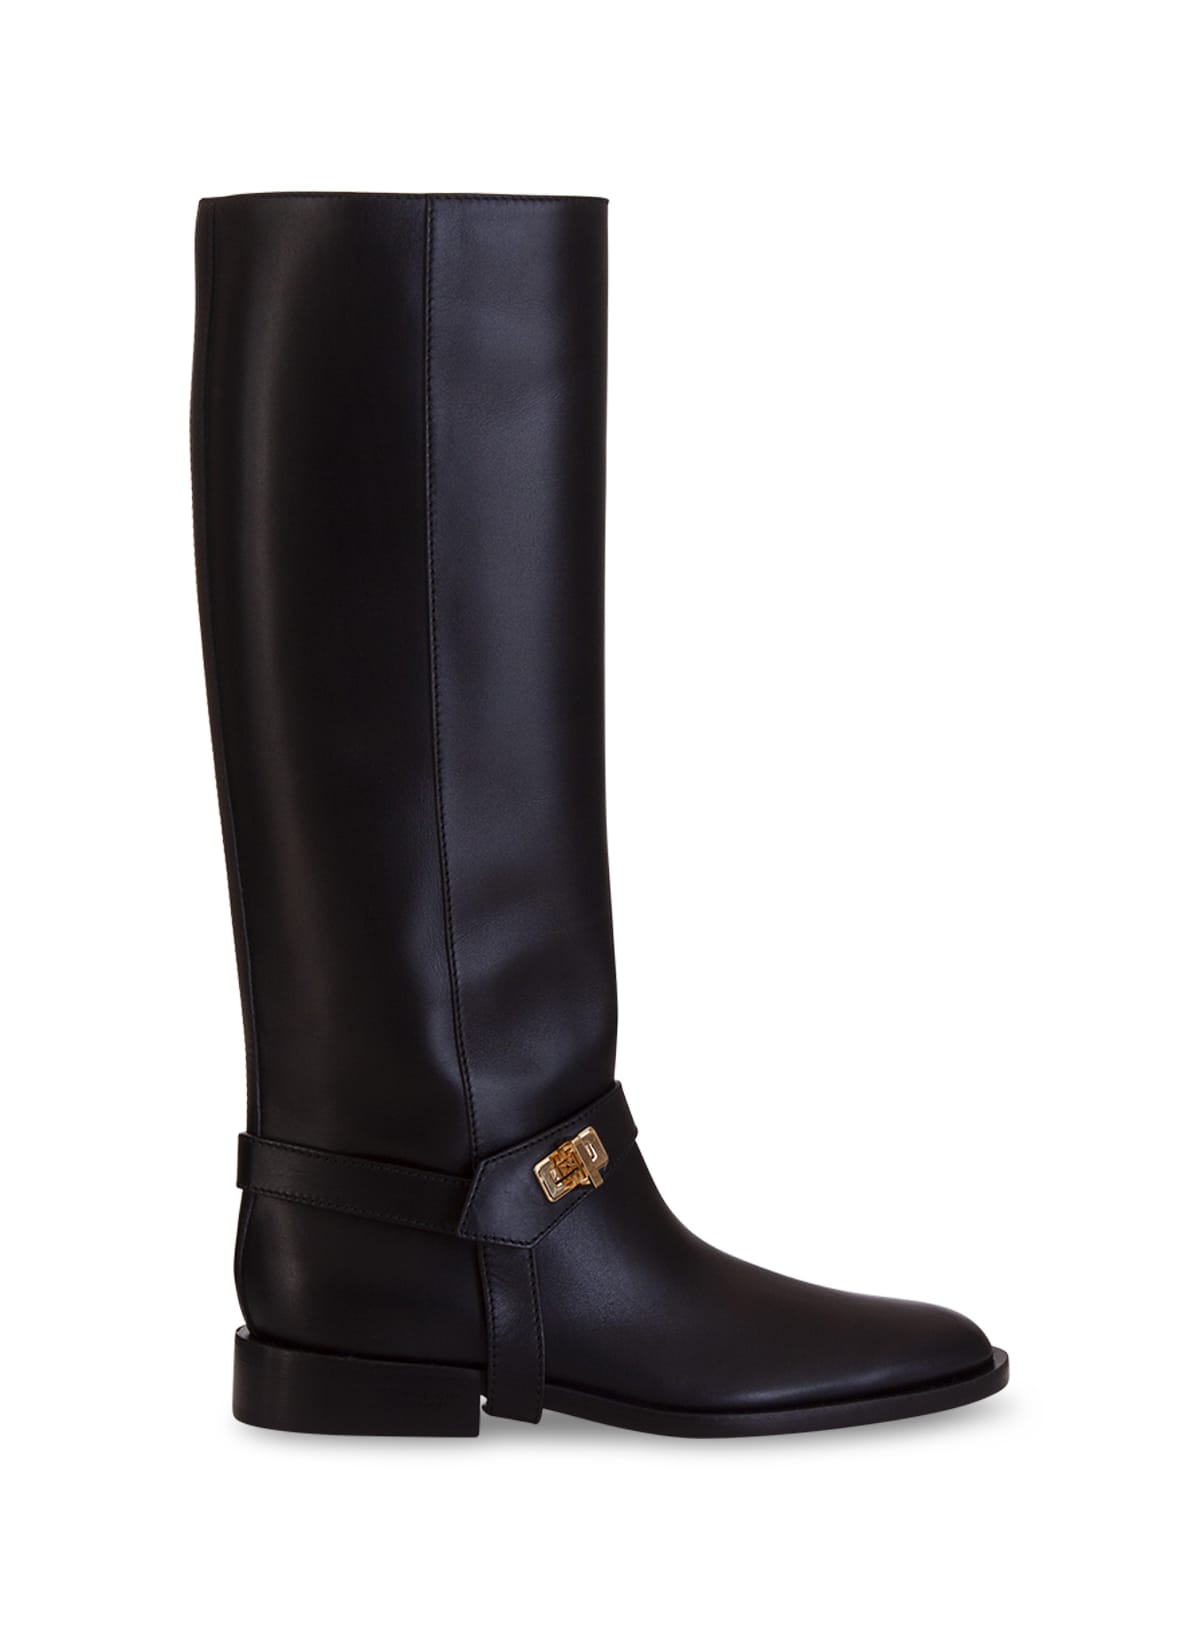 Buy Givenchy Eden High Boots online, shop Givenchy shoes with free shipping